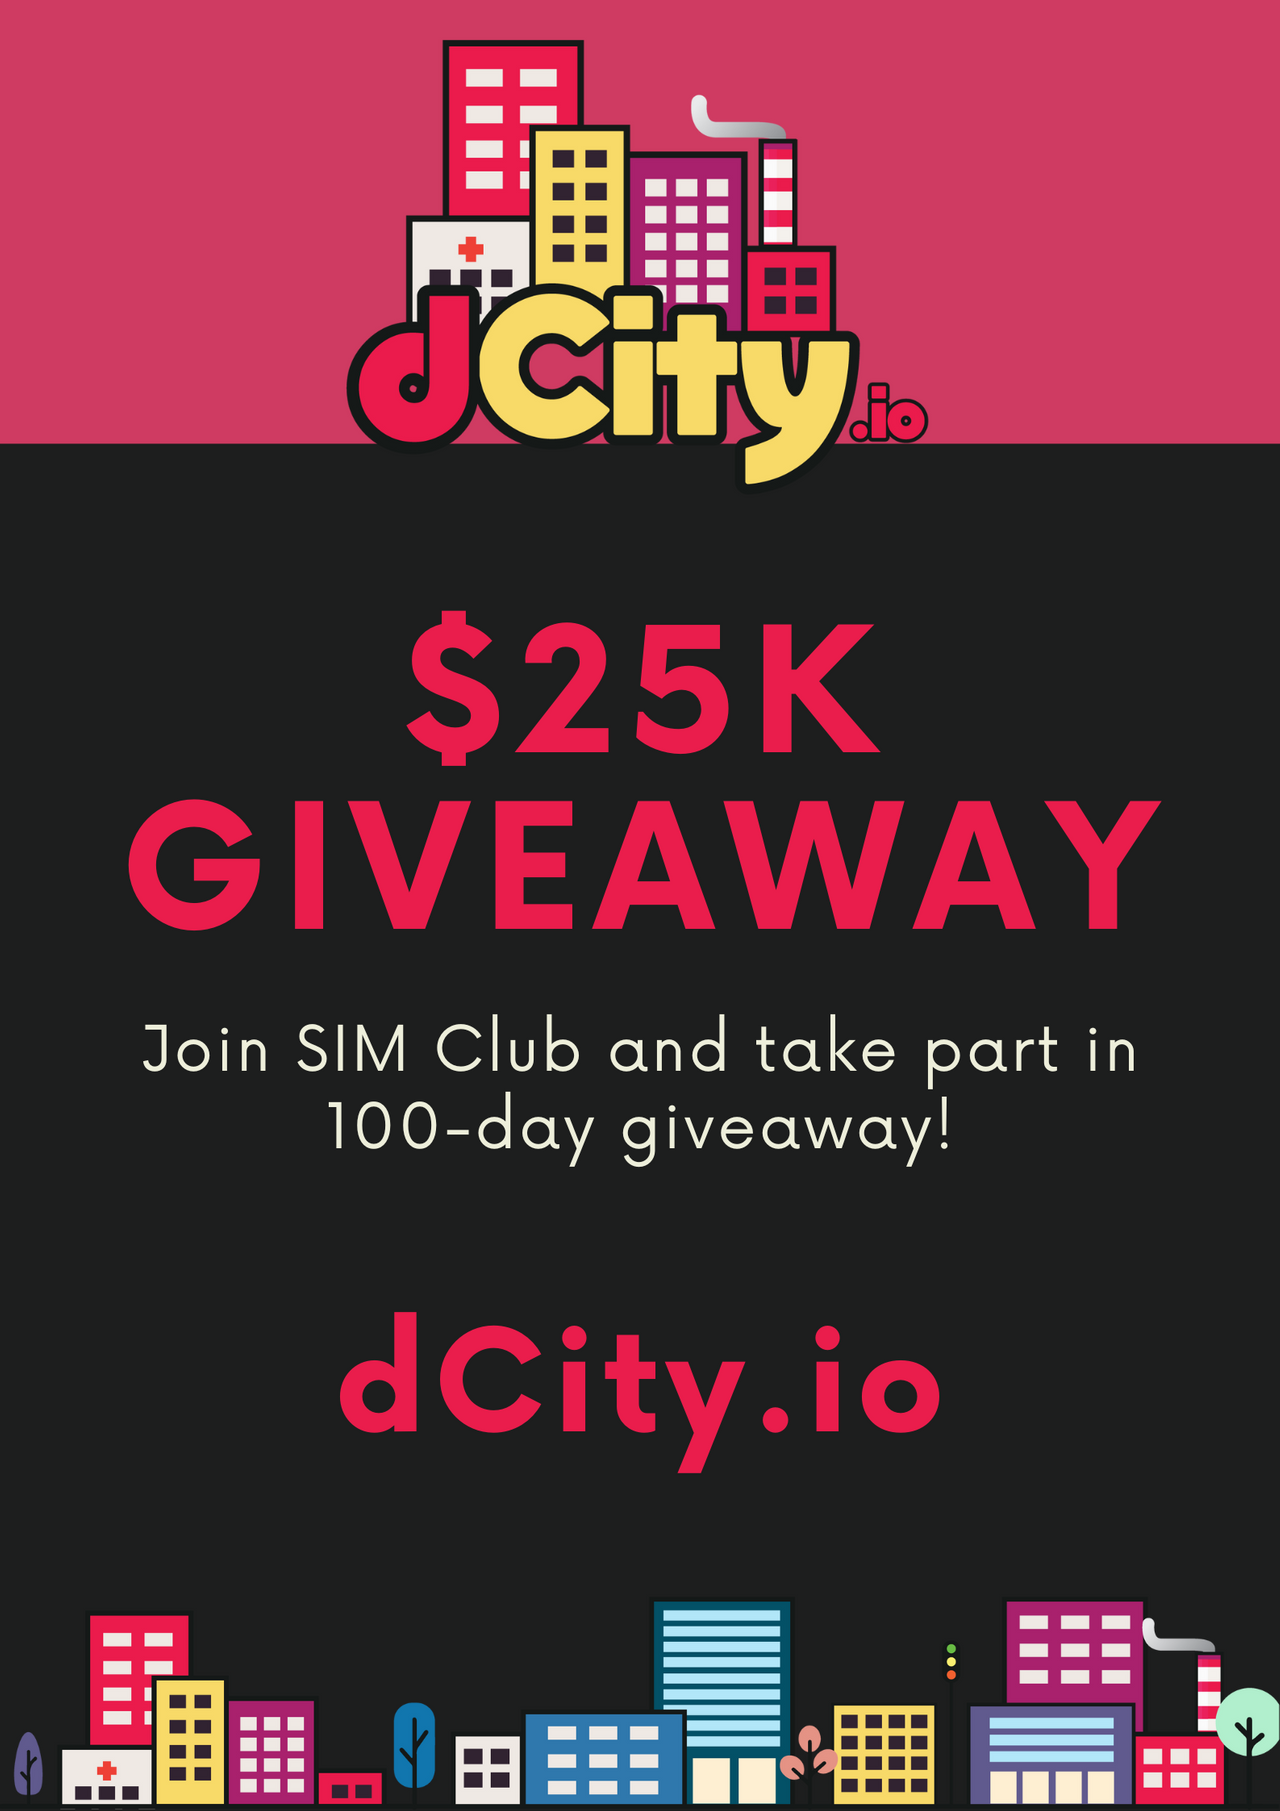 @gungunkrishu/dcity-simillionaire-club-benefits-with-usd25k-worth-of-rewards-as-a-giveaway